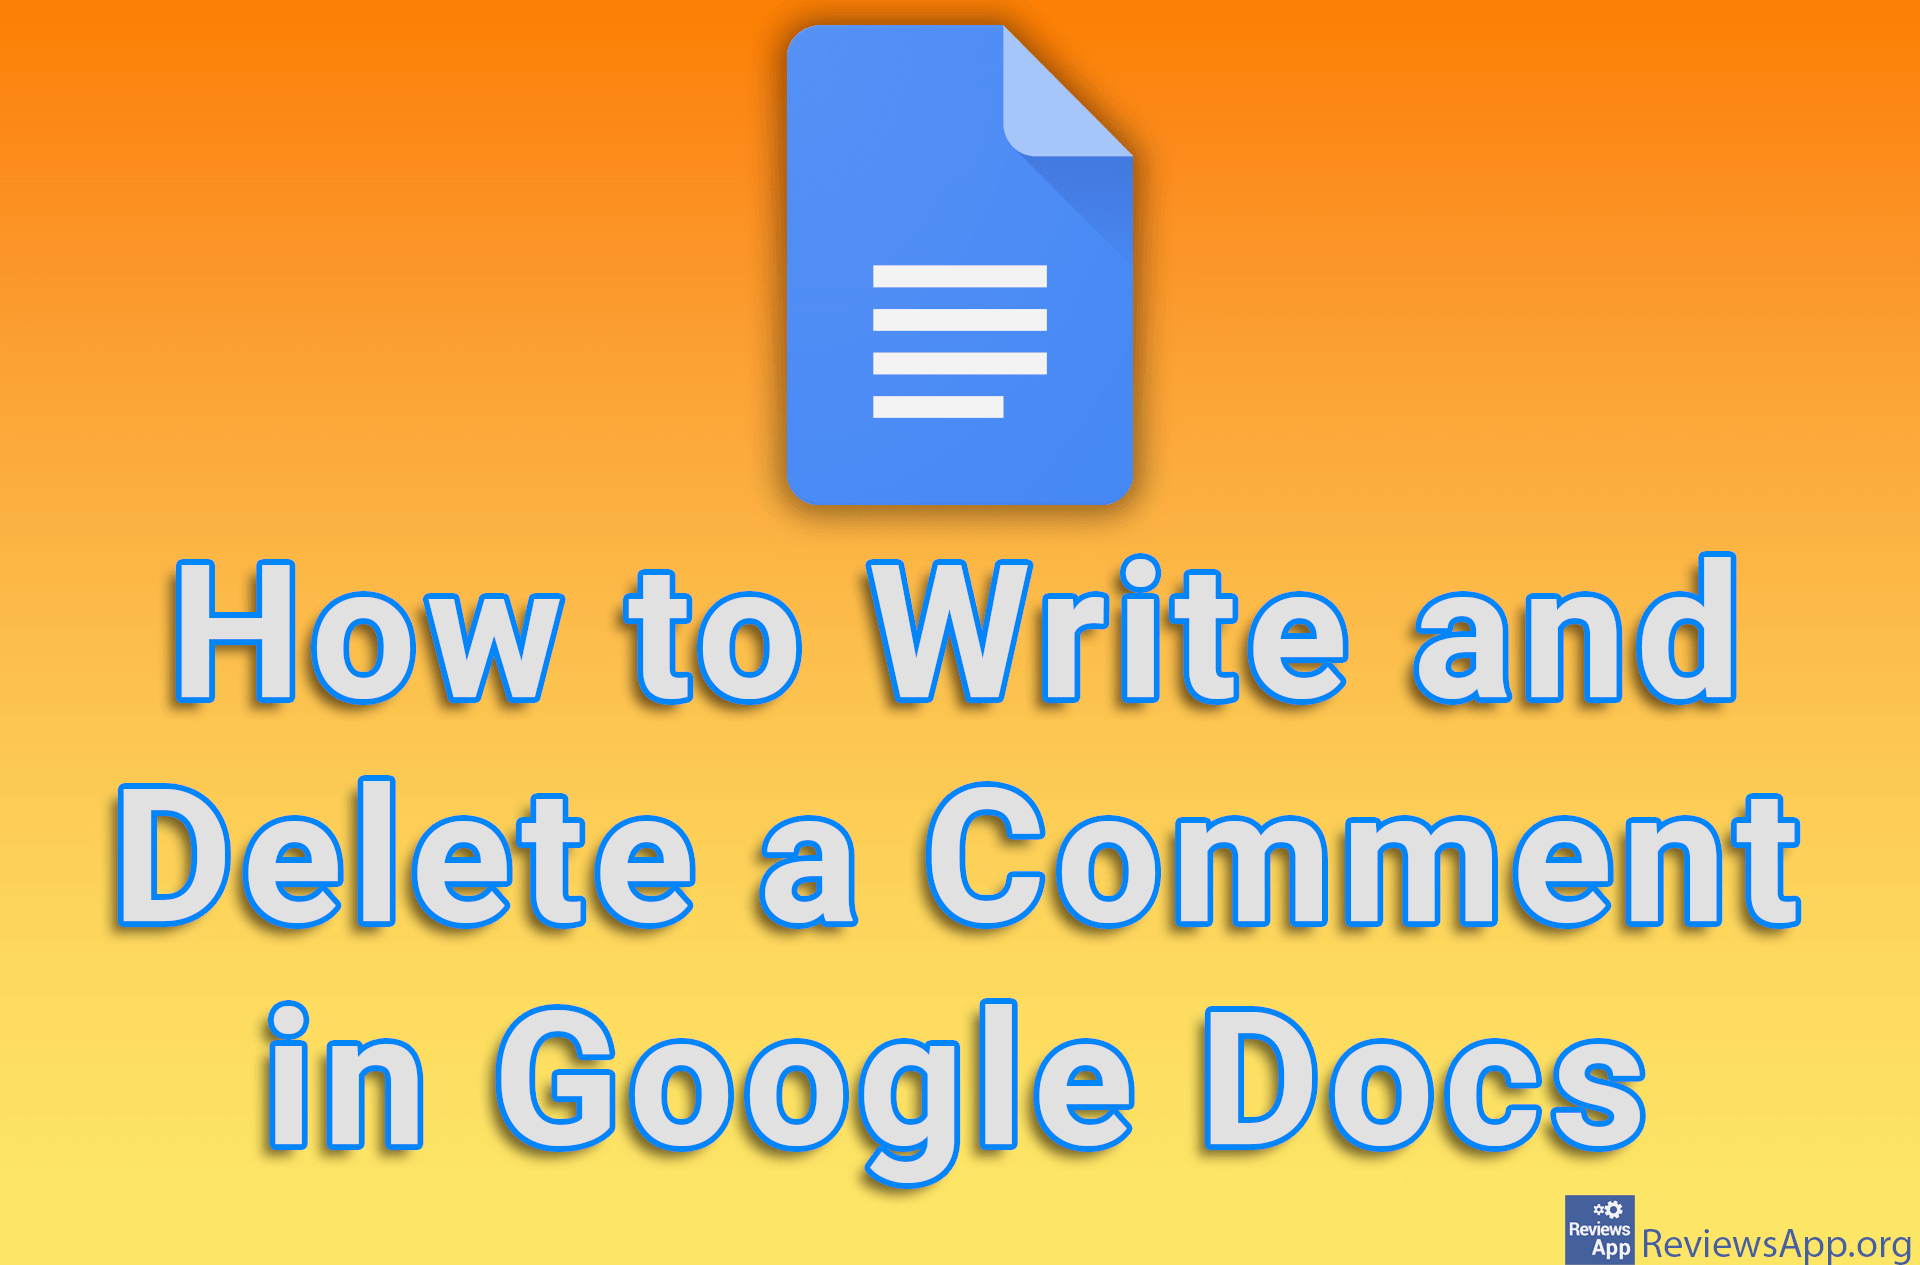 How to Write and Delete a Comment in Google Docs